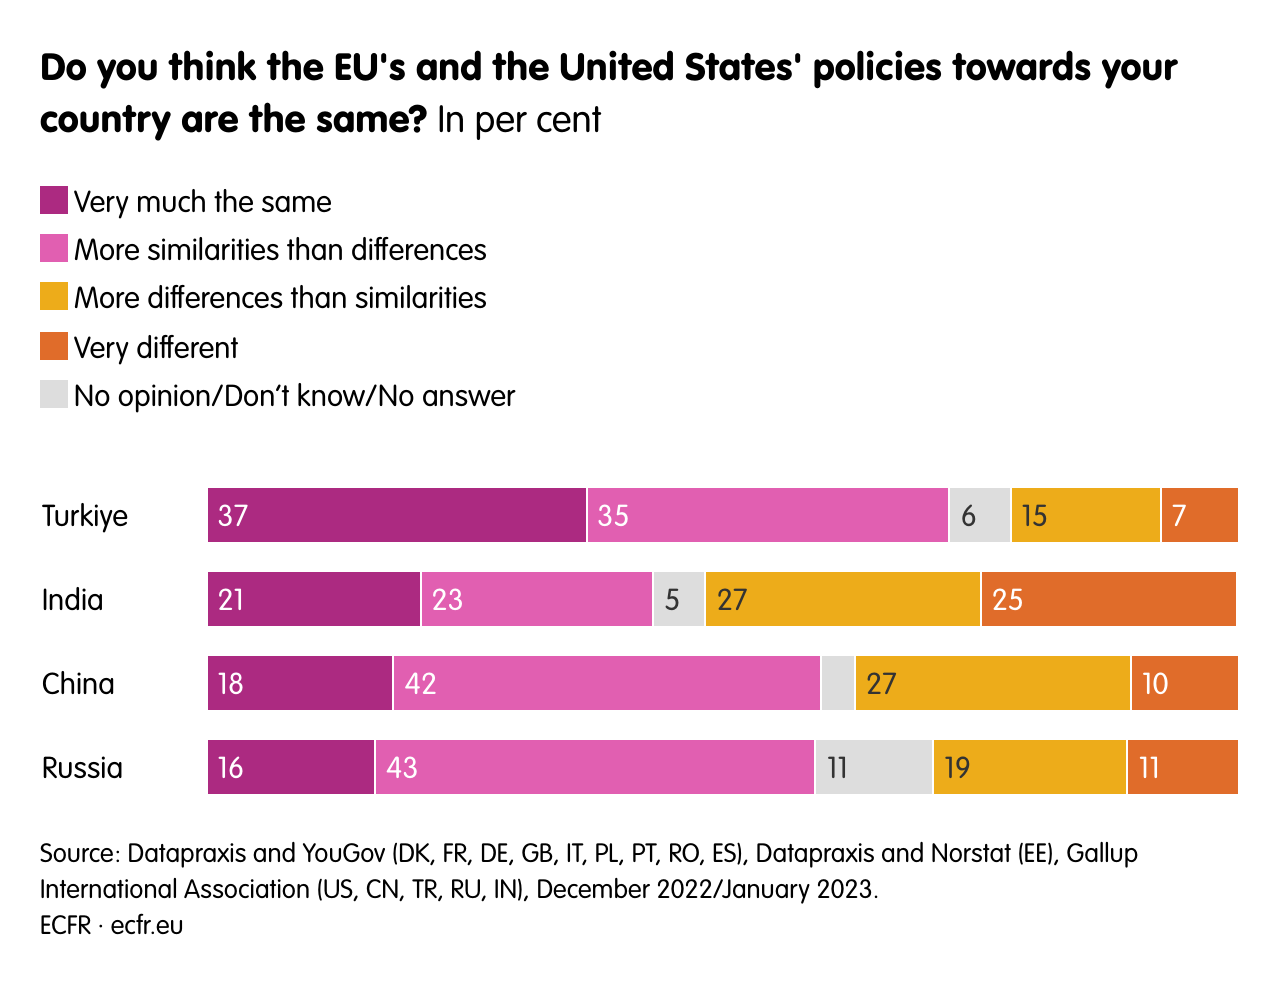 Do you think the EU's and the United States' policies towards your country are the same?